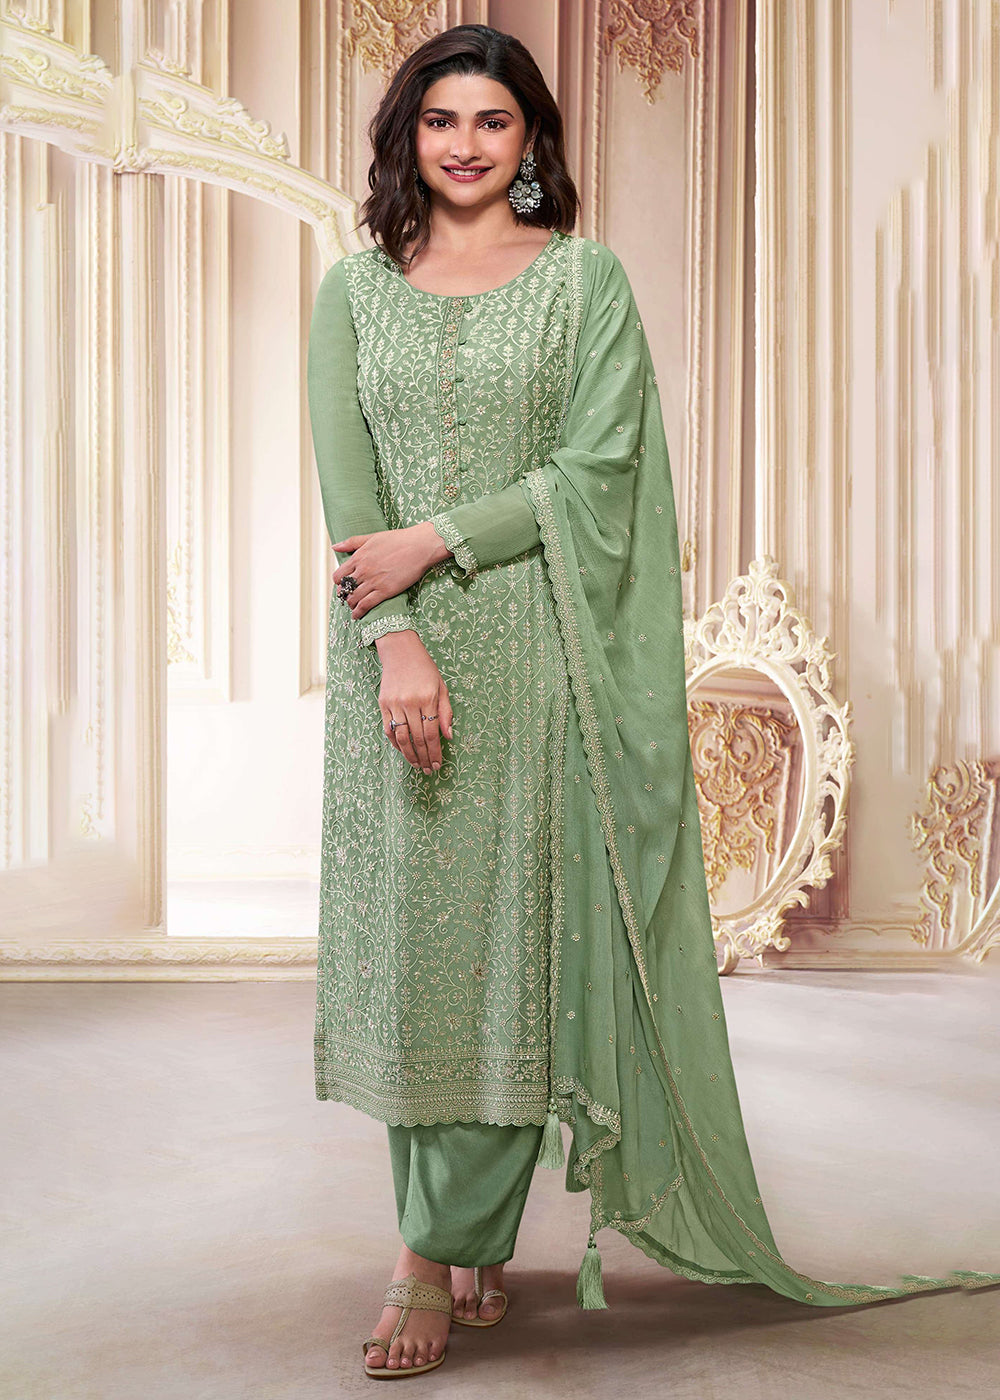 Buy Now Stunning Pista Green Embroidered Festive Salwar Suit Online in USA, UK, Canada, Germany, Australia & Worldwide at Empress Clothing.